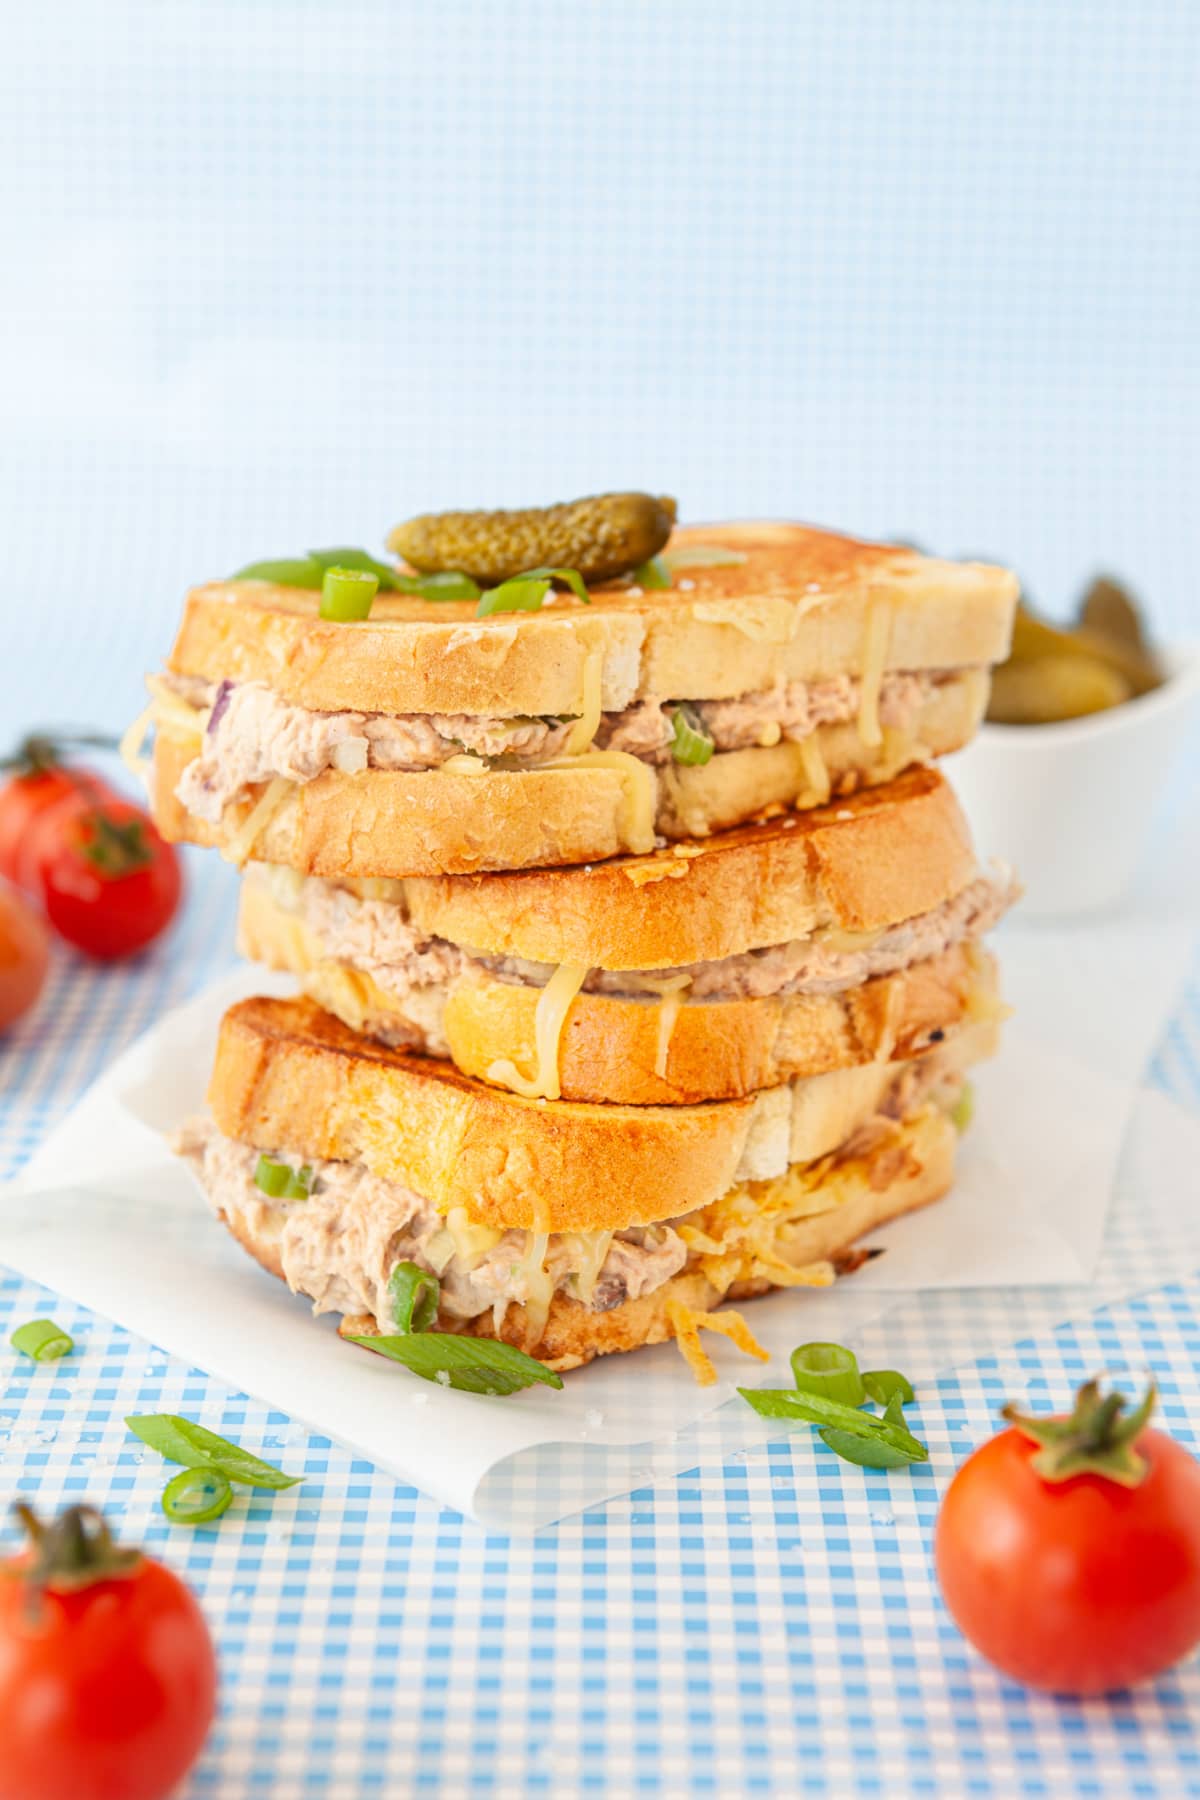 Grilled sandwich with tuna and melted cheese